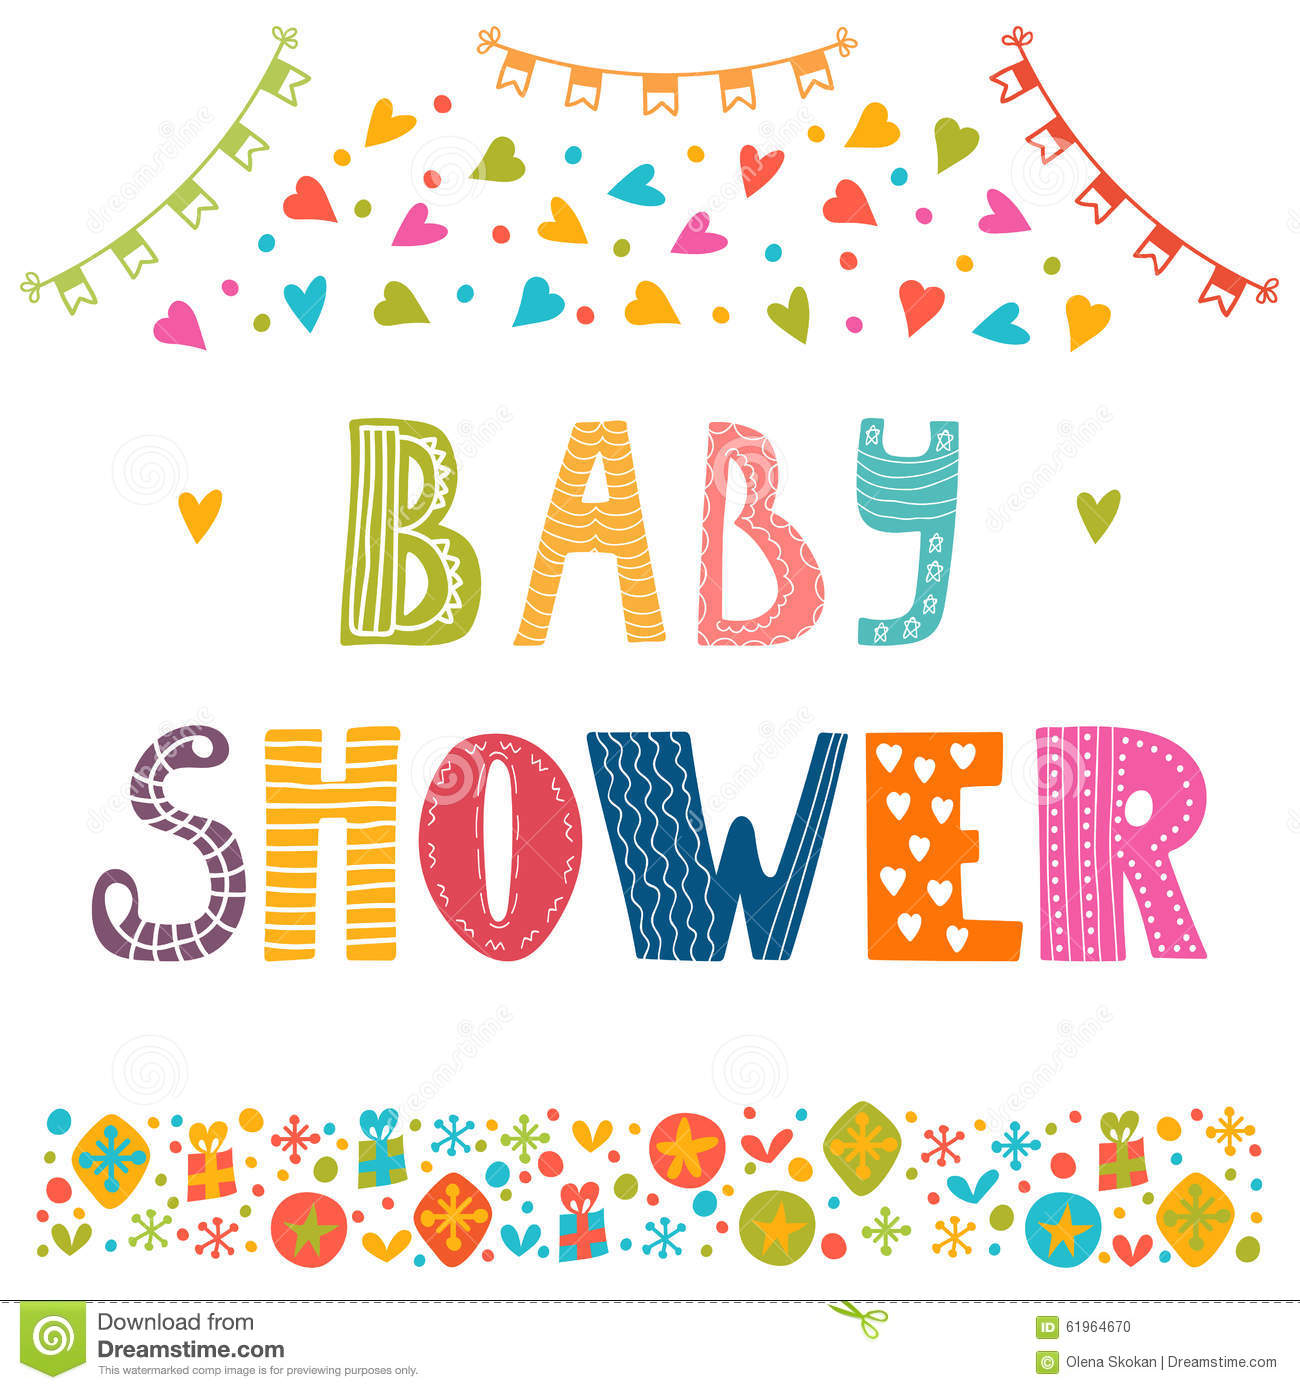 Full Size of Baby Shower:sturdy Baby Shower Invitation Template Image Concepts Baby Shower Invitation Template Cute Postcard Stock Vector Download Baby Shower Invitation Template Cute Postcard Stock Vector Illustration Of Design Celebration